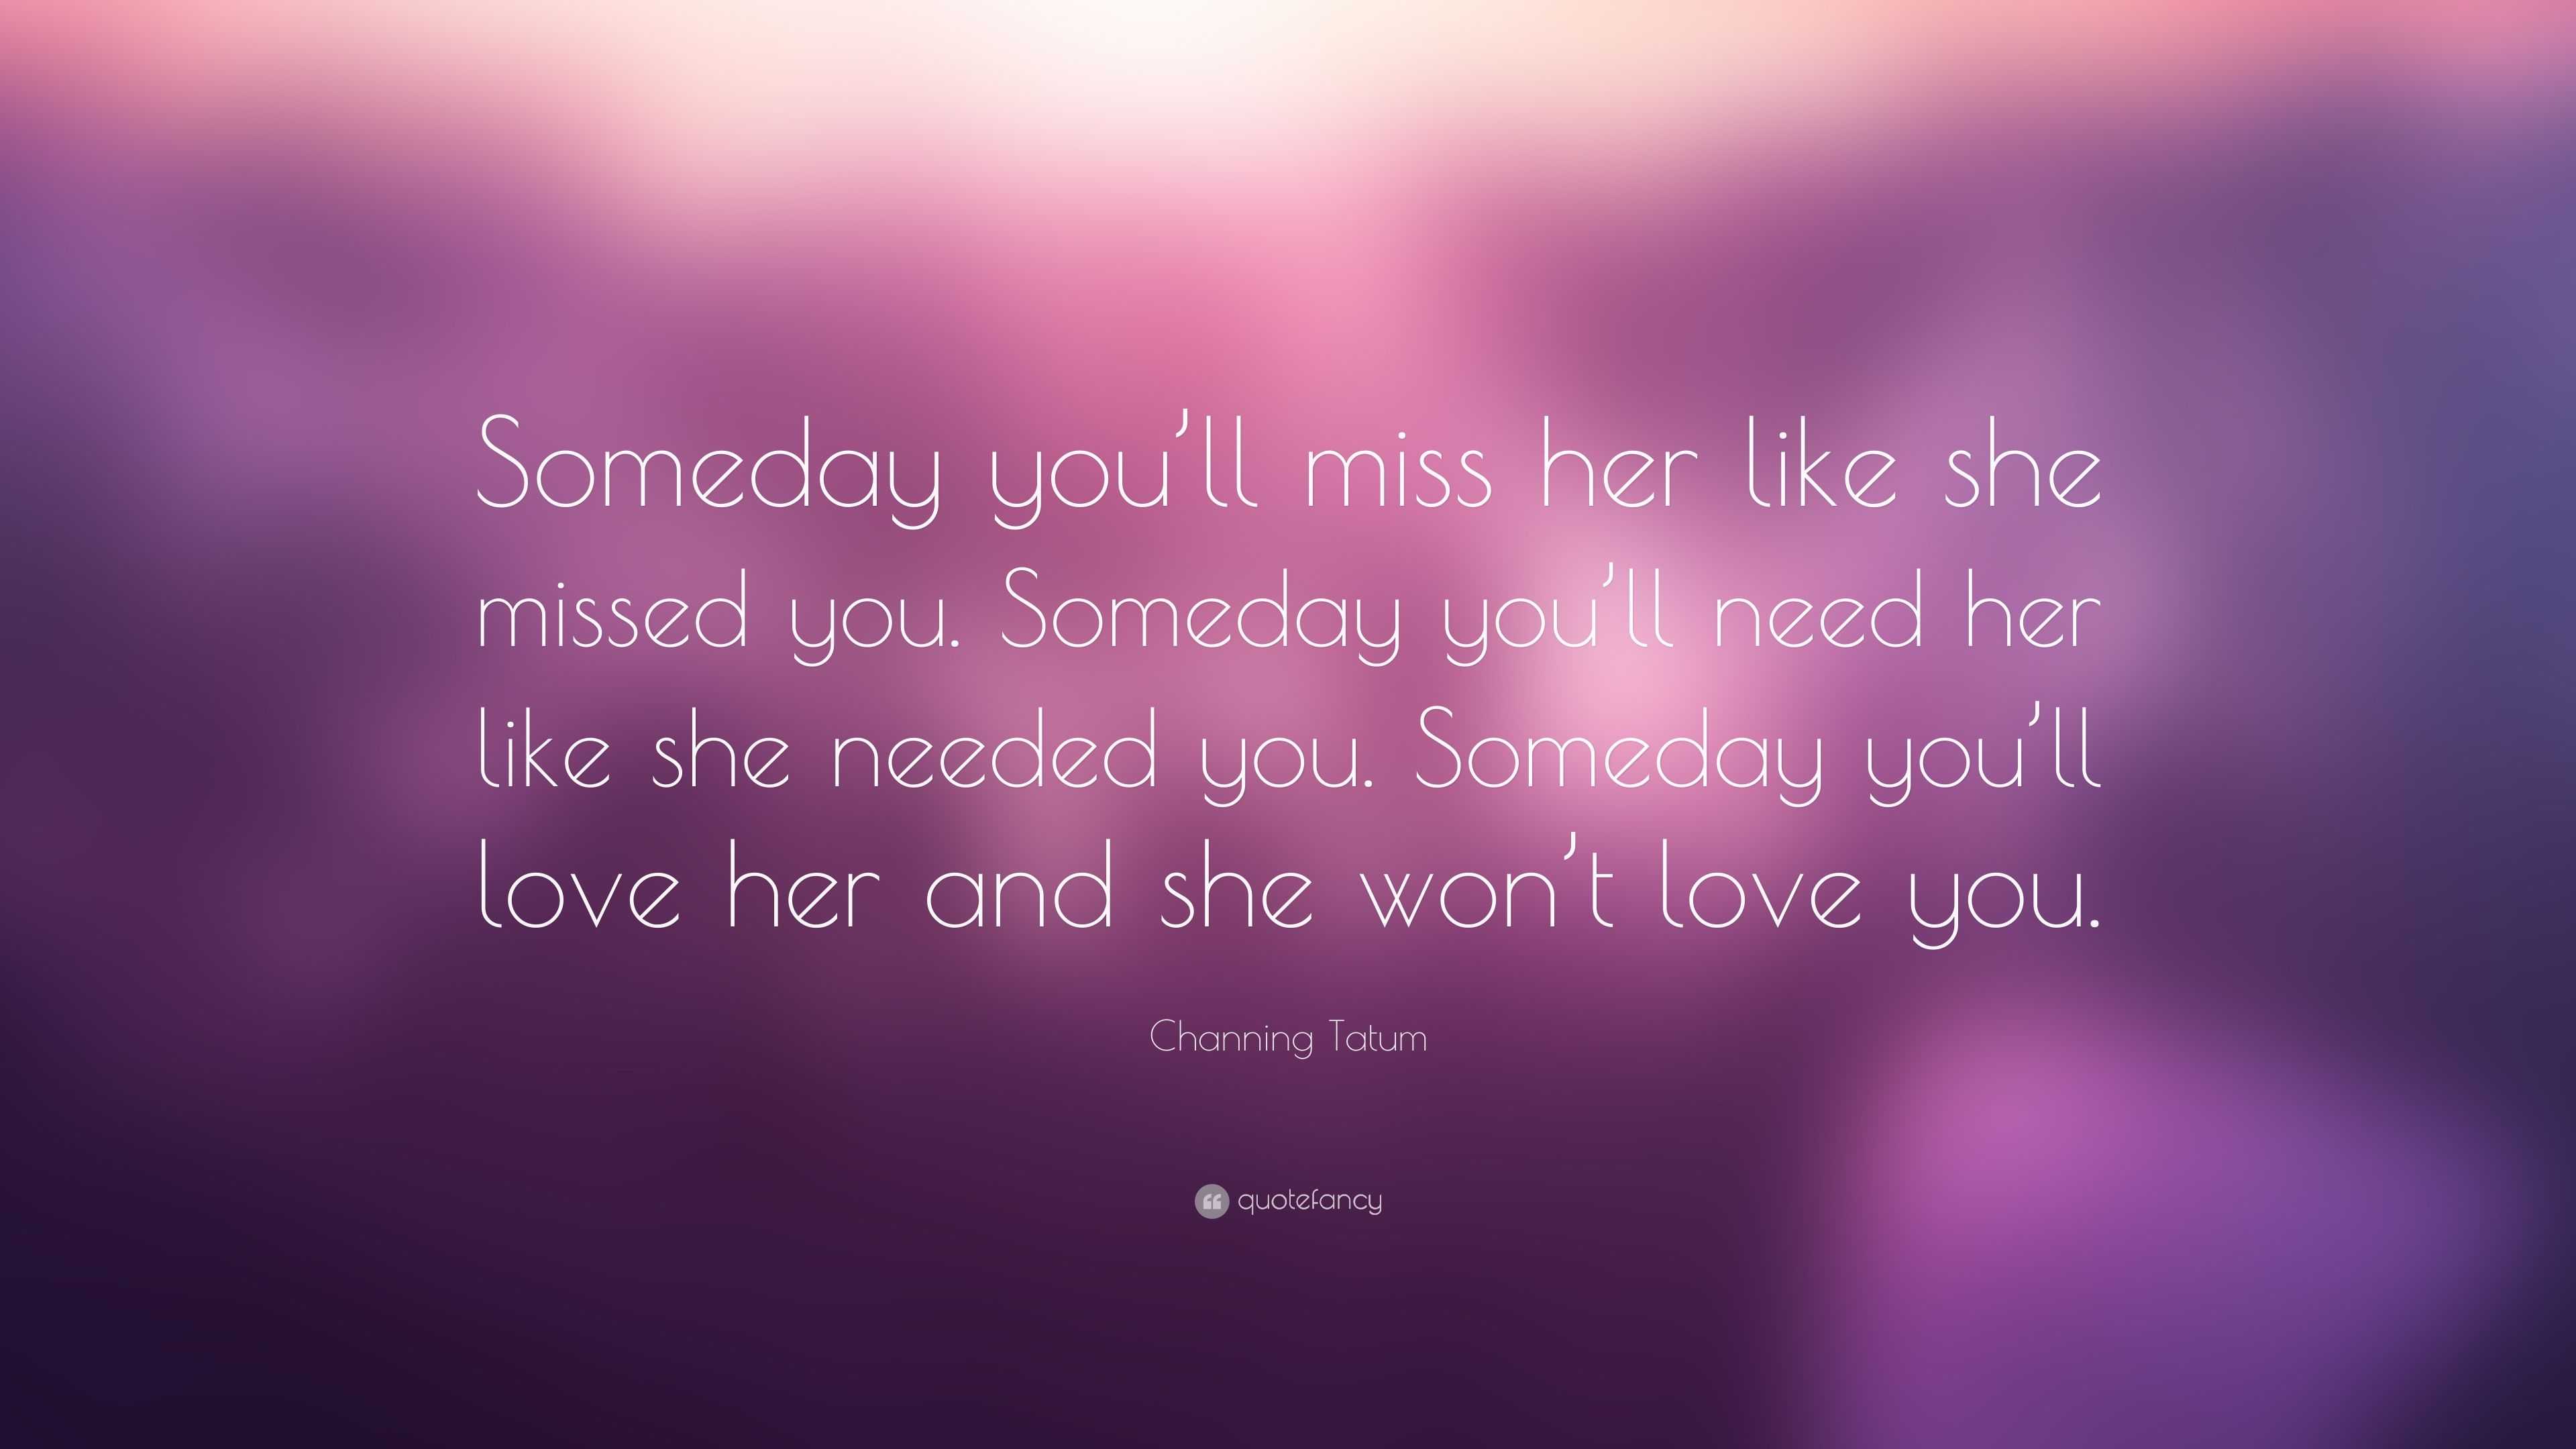 Channing Tatum Quote “Someday you ll miss her like she missed you